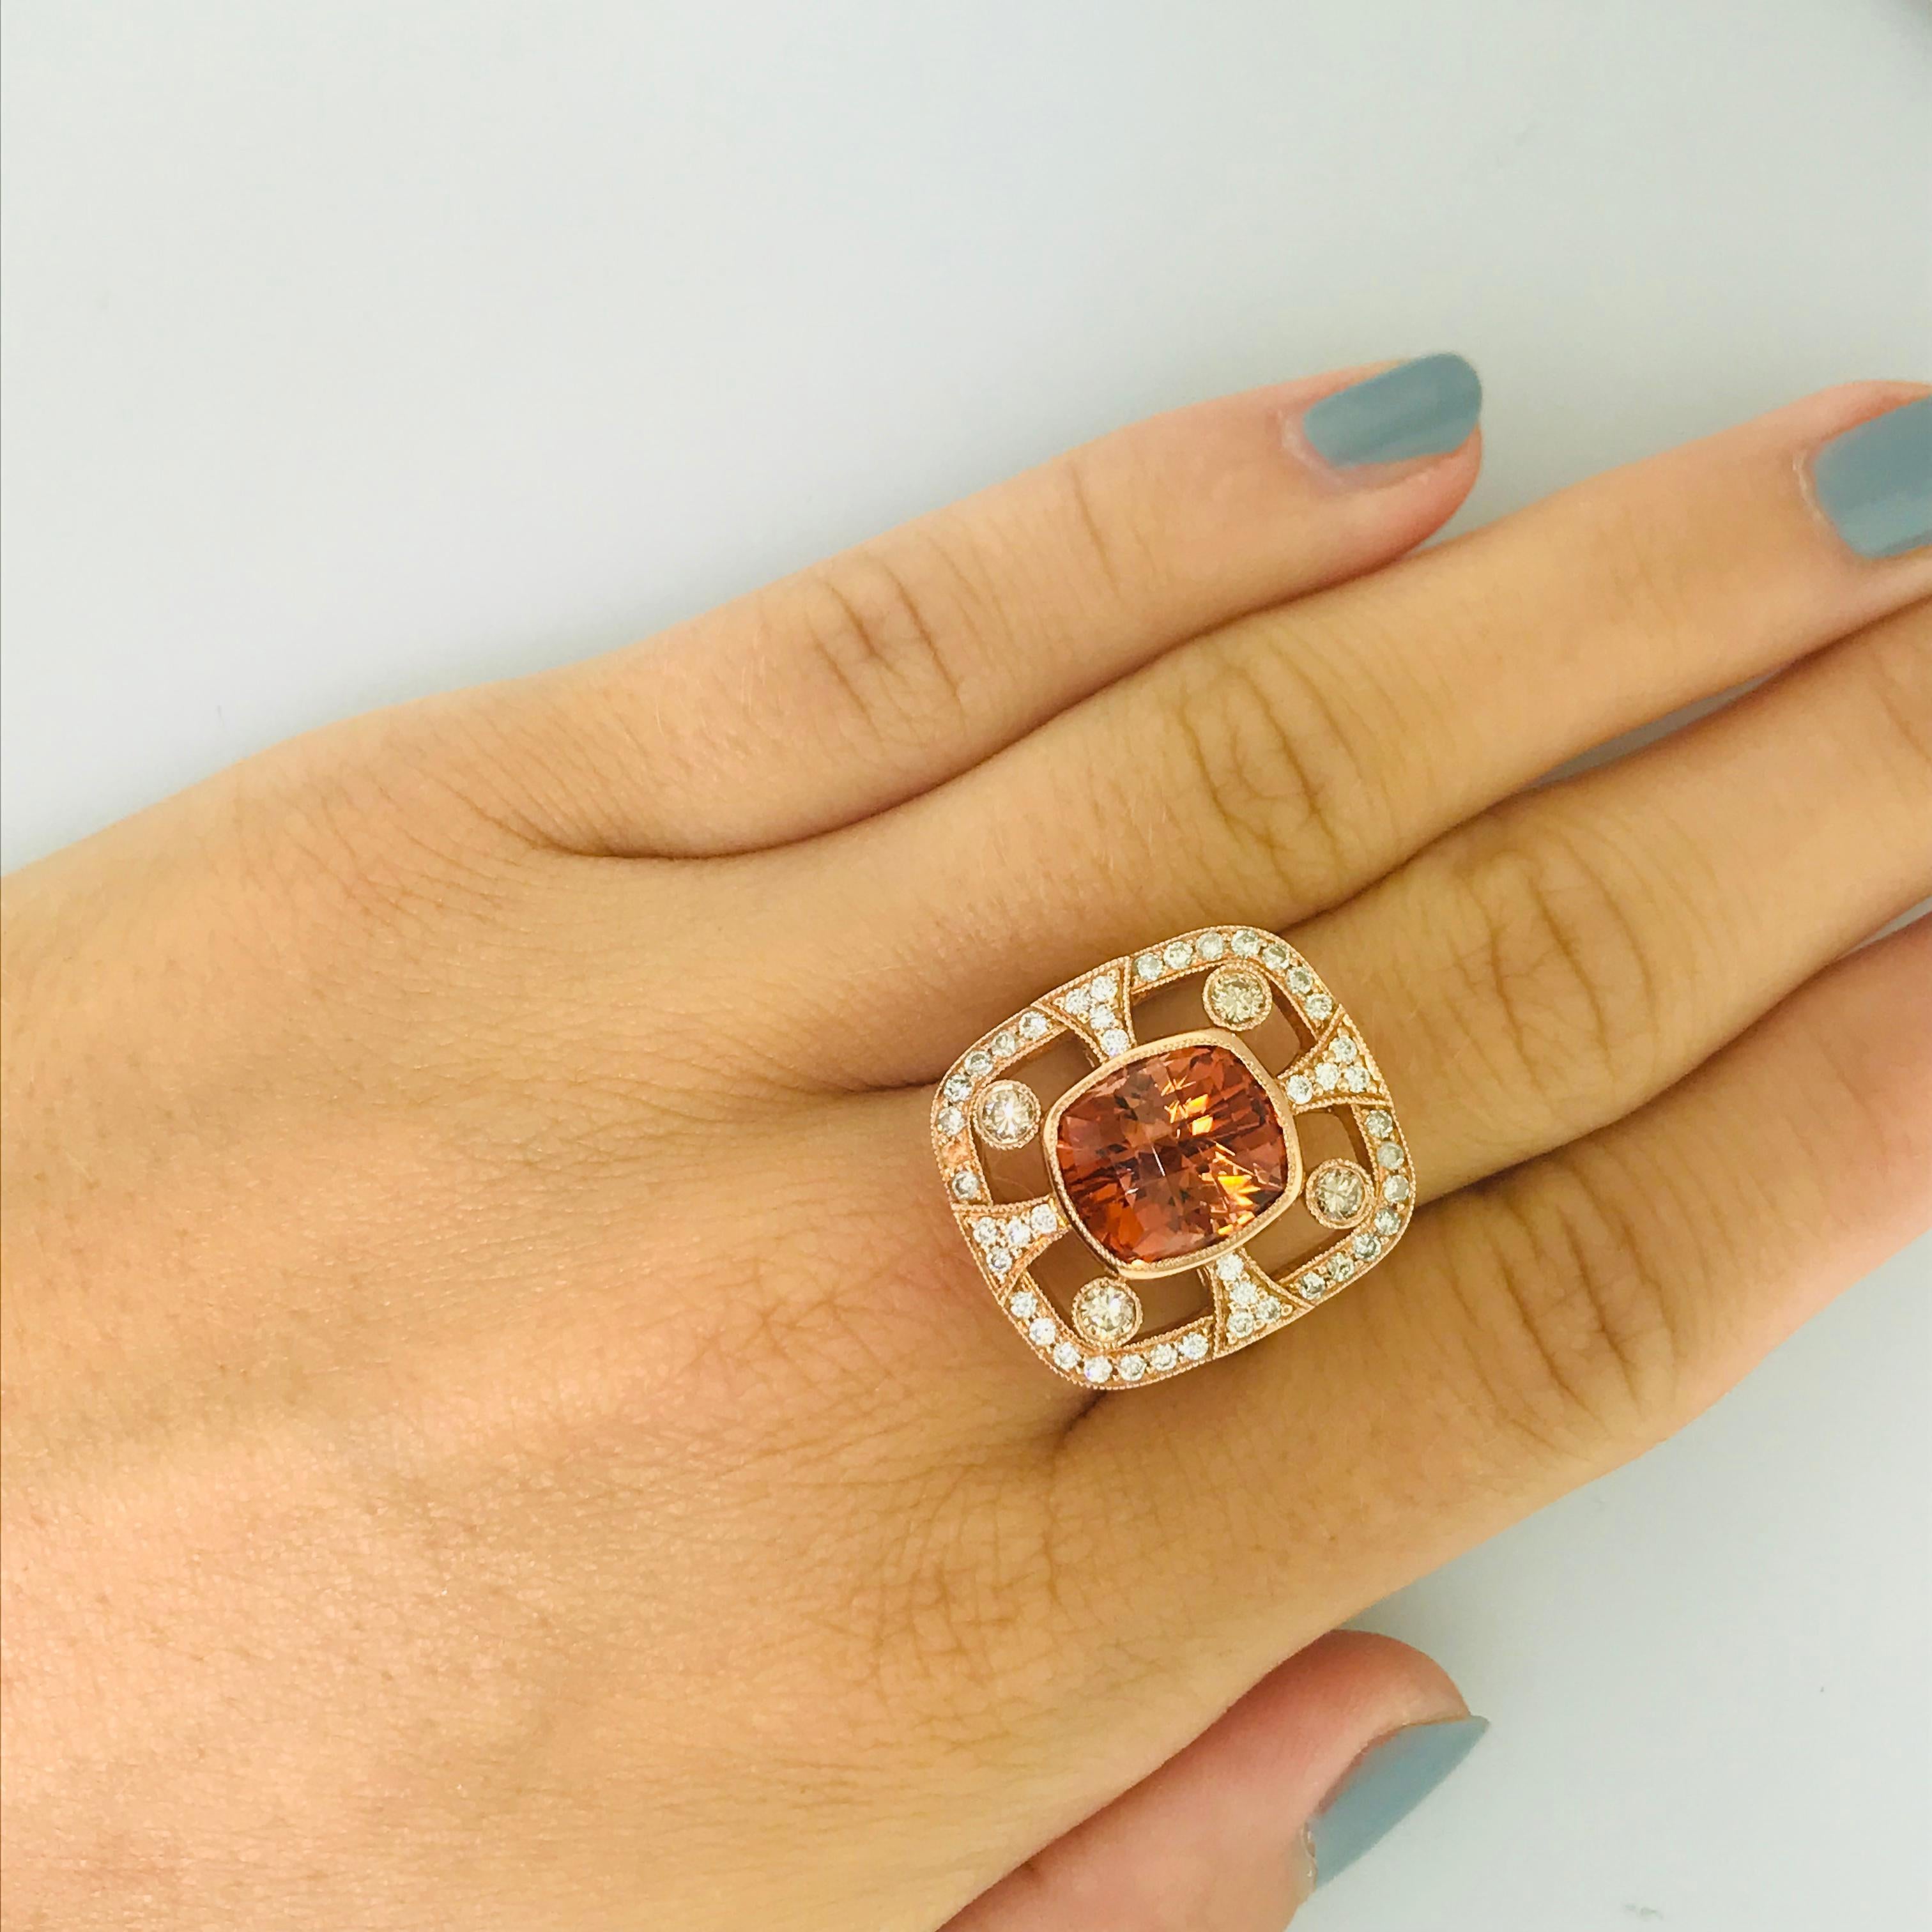 Custom, One Of A Kind Copper Citrine and Diamond Ring in Rose Gold:
This special one of a kind 2 carat custom ring has been designed by Five Star Jewelry in Austin Texas. Each step of the design process was created carefully and every stone has been